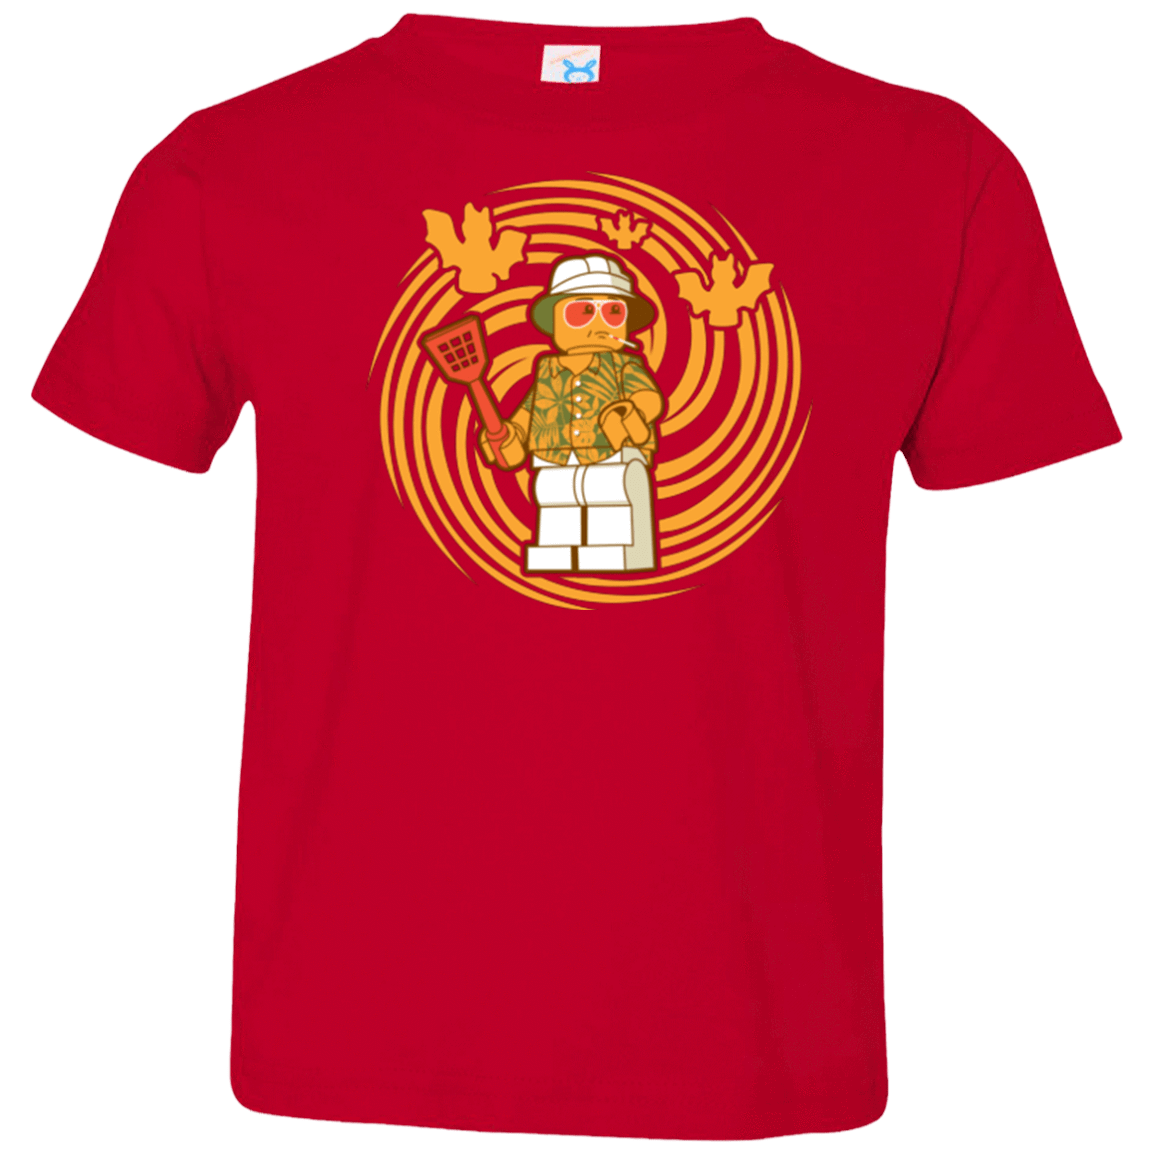 T-Shirts Red / 2T Brick Country Toddler Premium T-Shirt